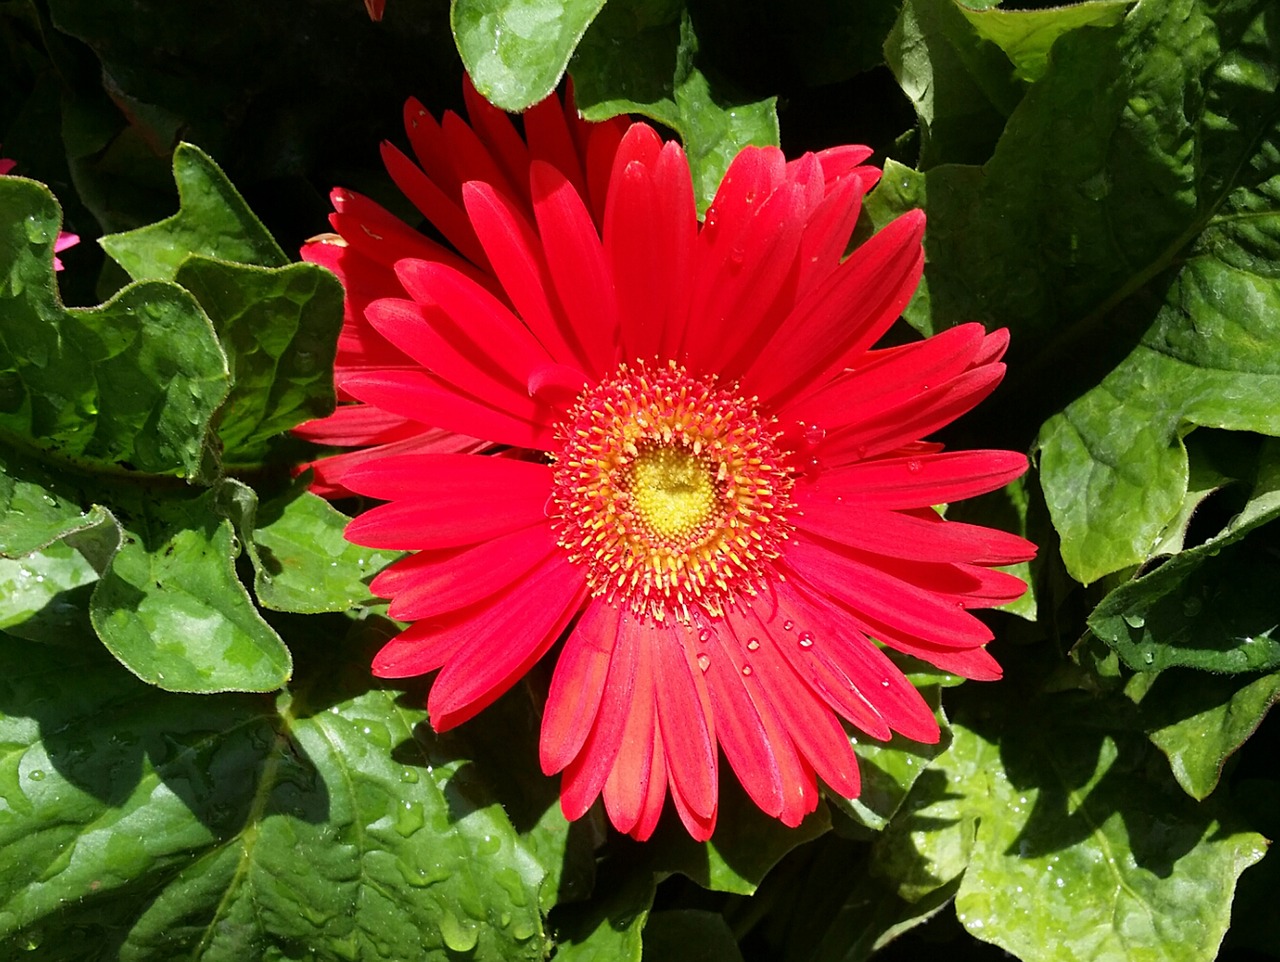 Download free photo of Gerber,daisy,red,dew,spring - from needpix.com